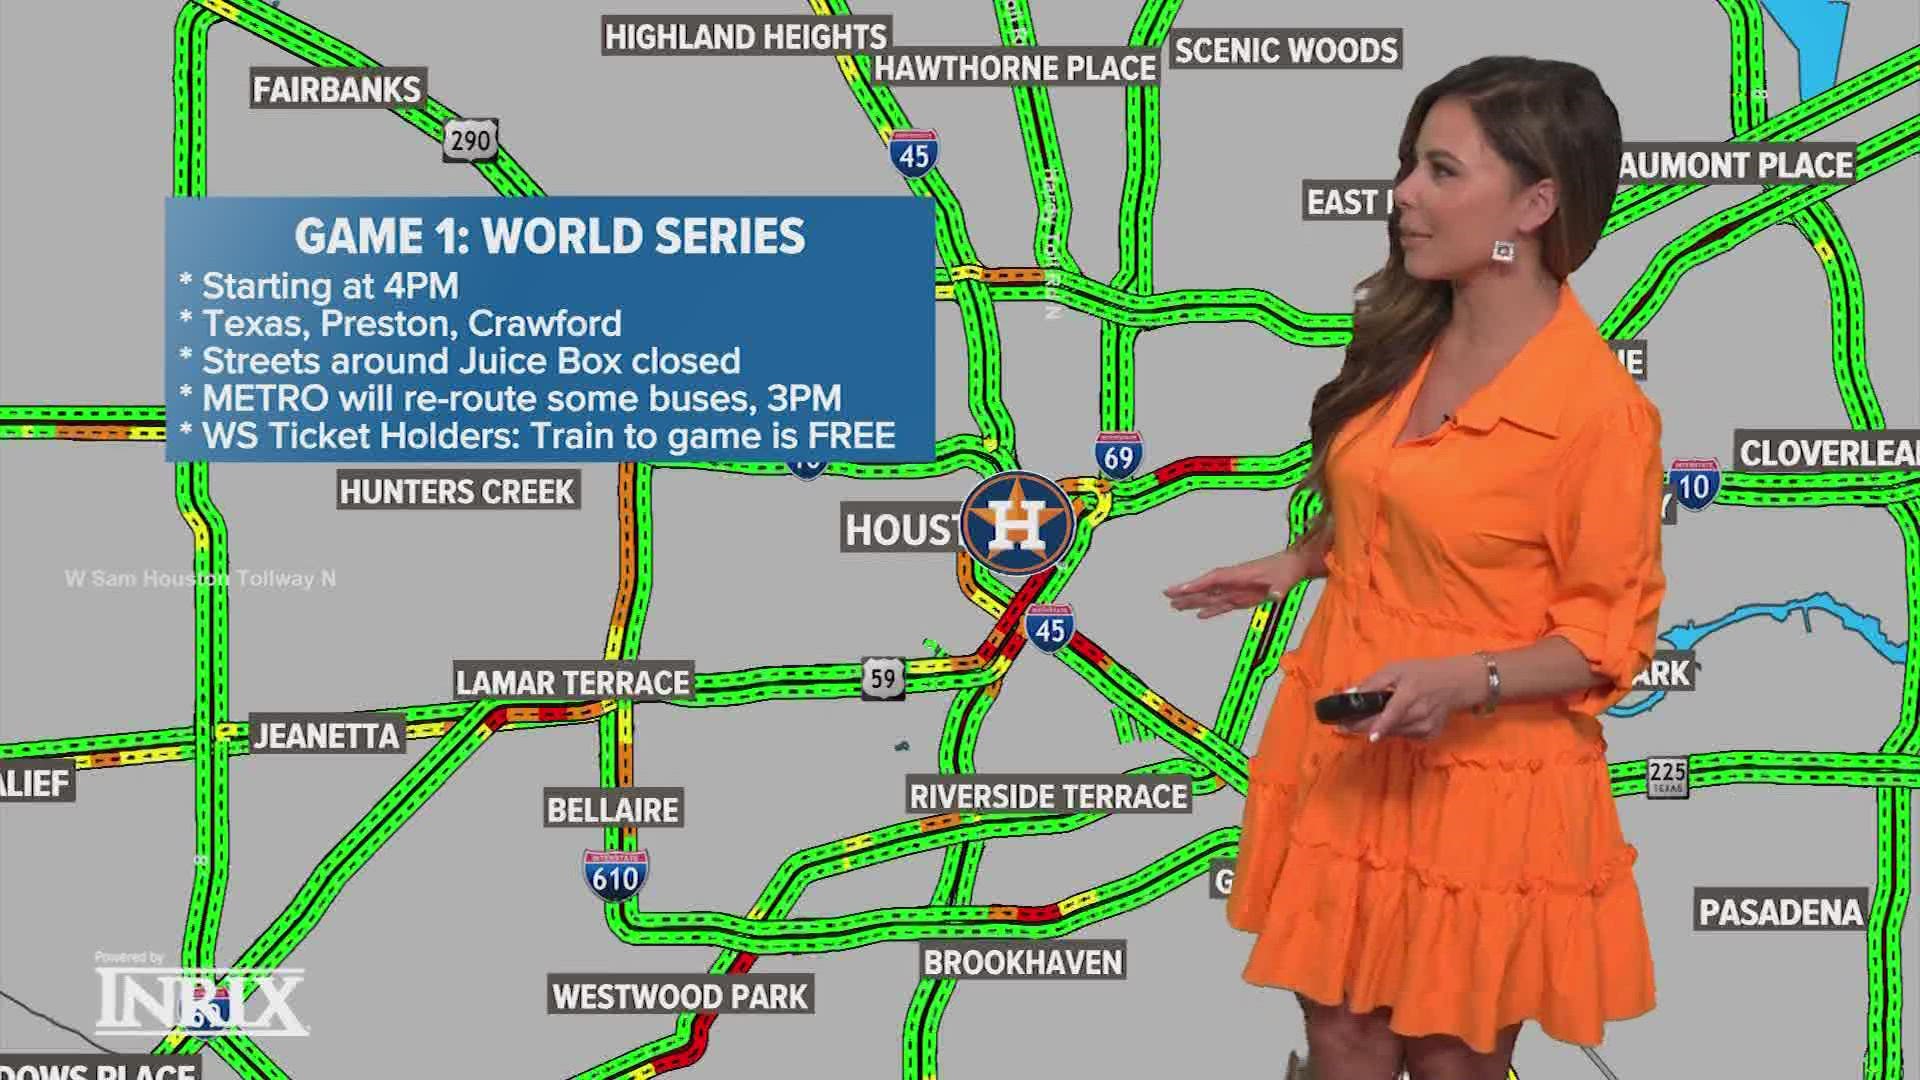 If you're headed to Game 1 of the World Series at Minute Maid Park, then you're going to want to be aware of these road closures to make sure you make it on time.